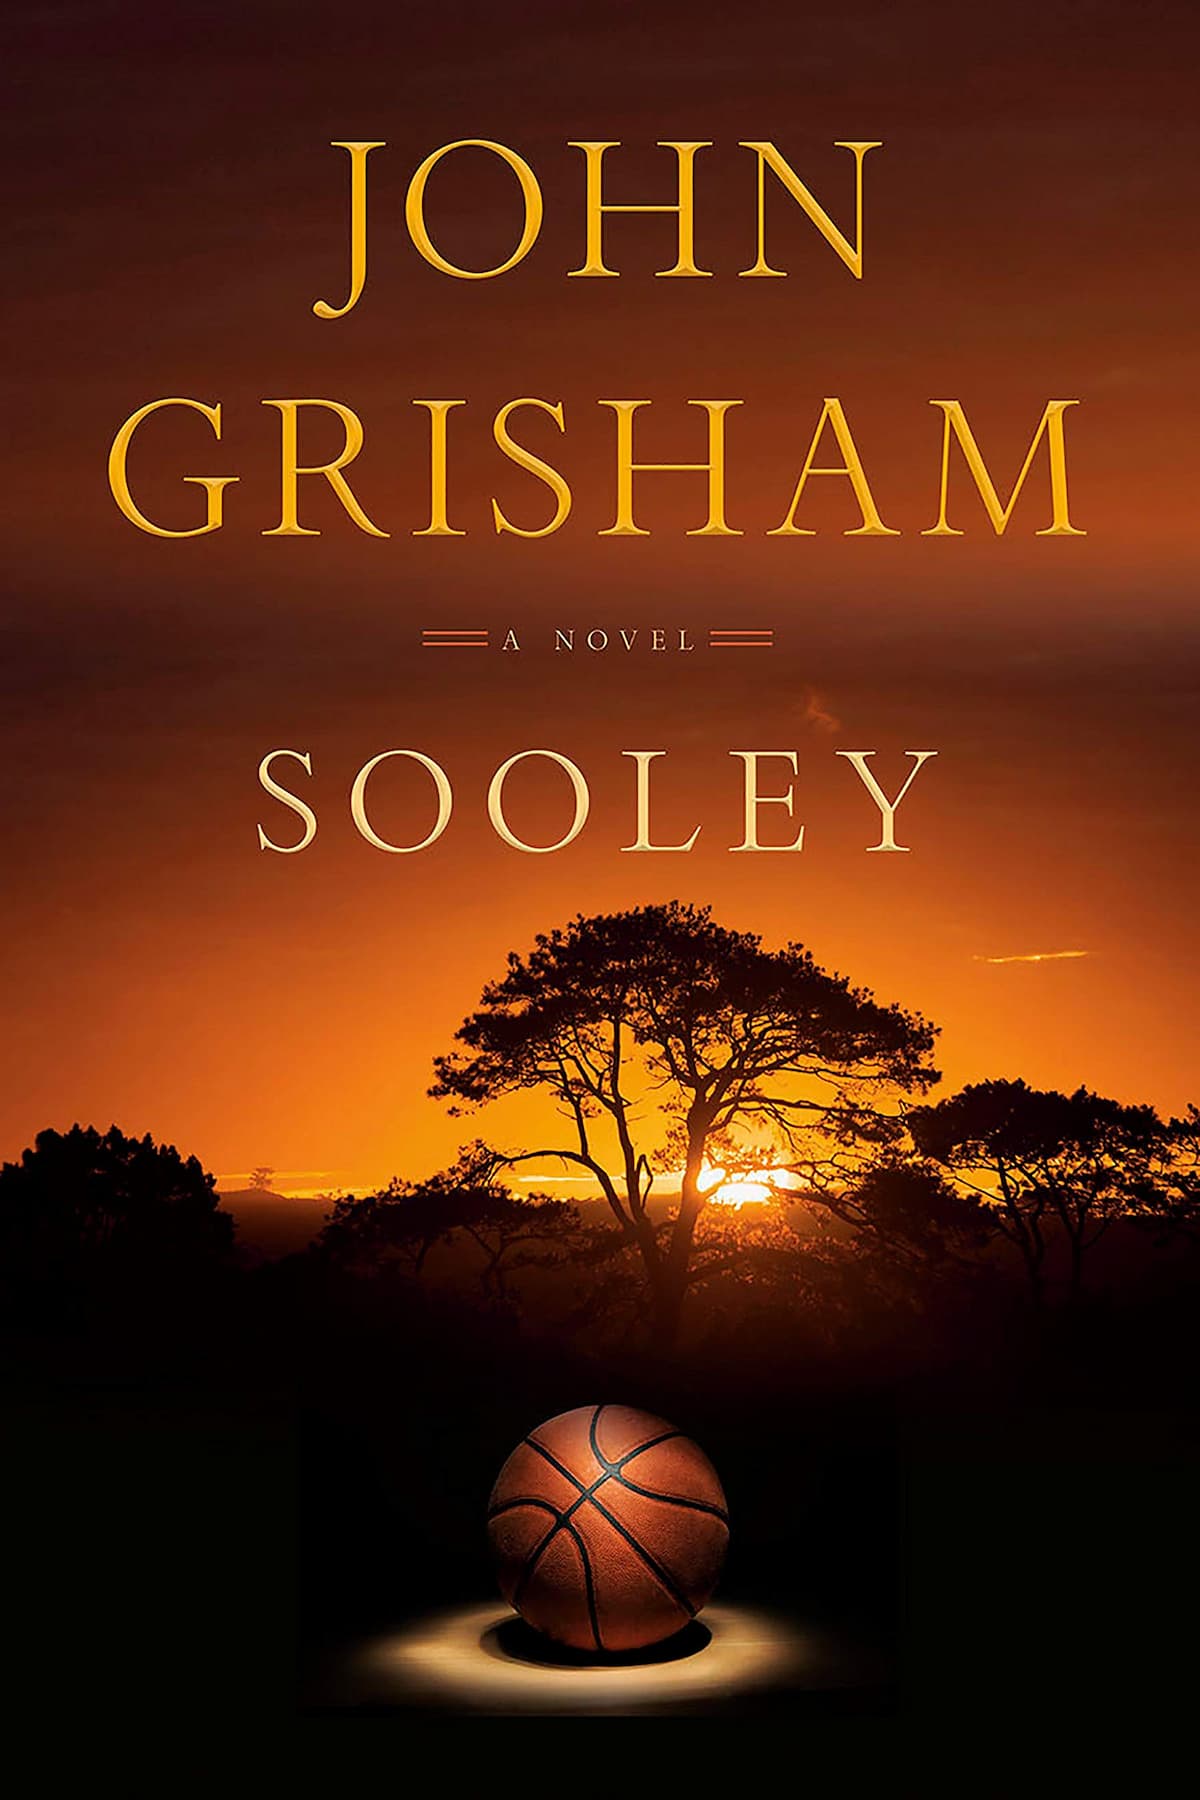 If you’re one who enjoys recharging your energies during the holidays, you’ll find "Sooley – John Grisham" very helpful!